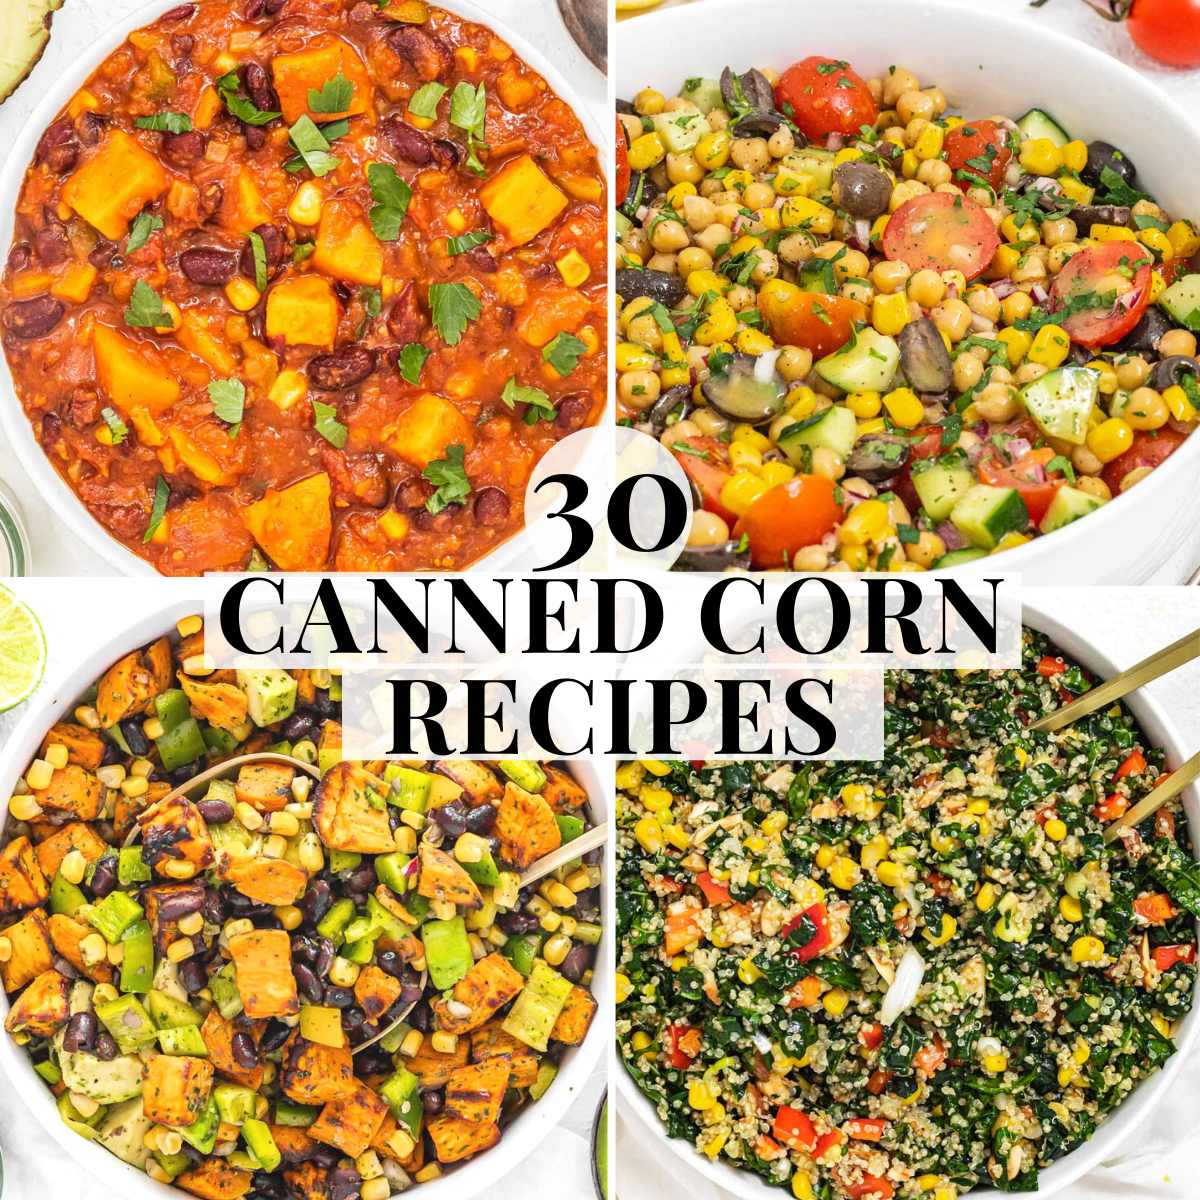 Canned corn recipes with salads and hot meals